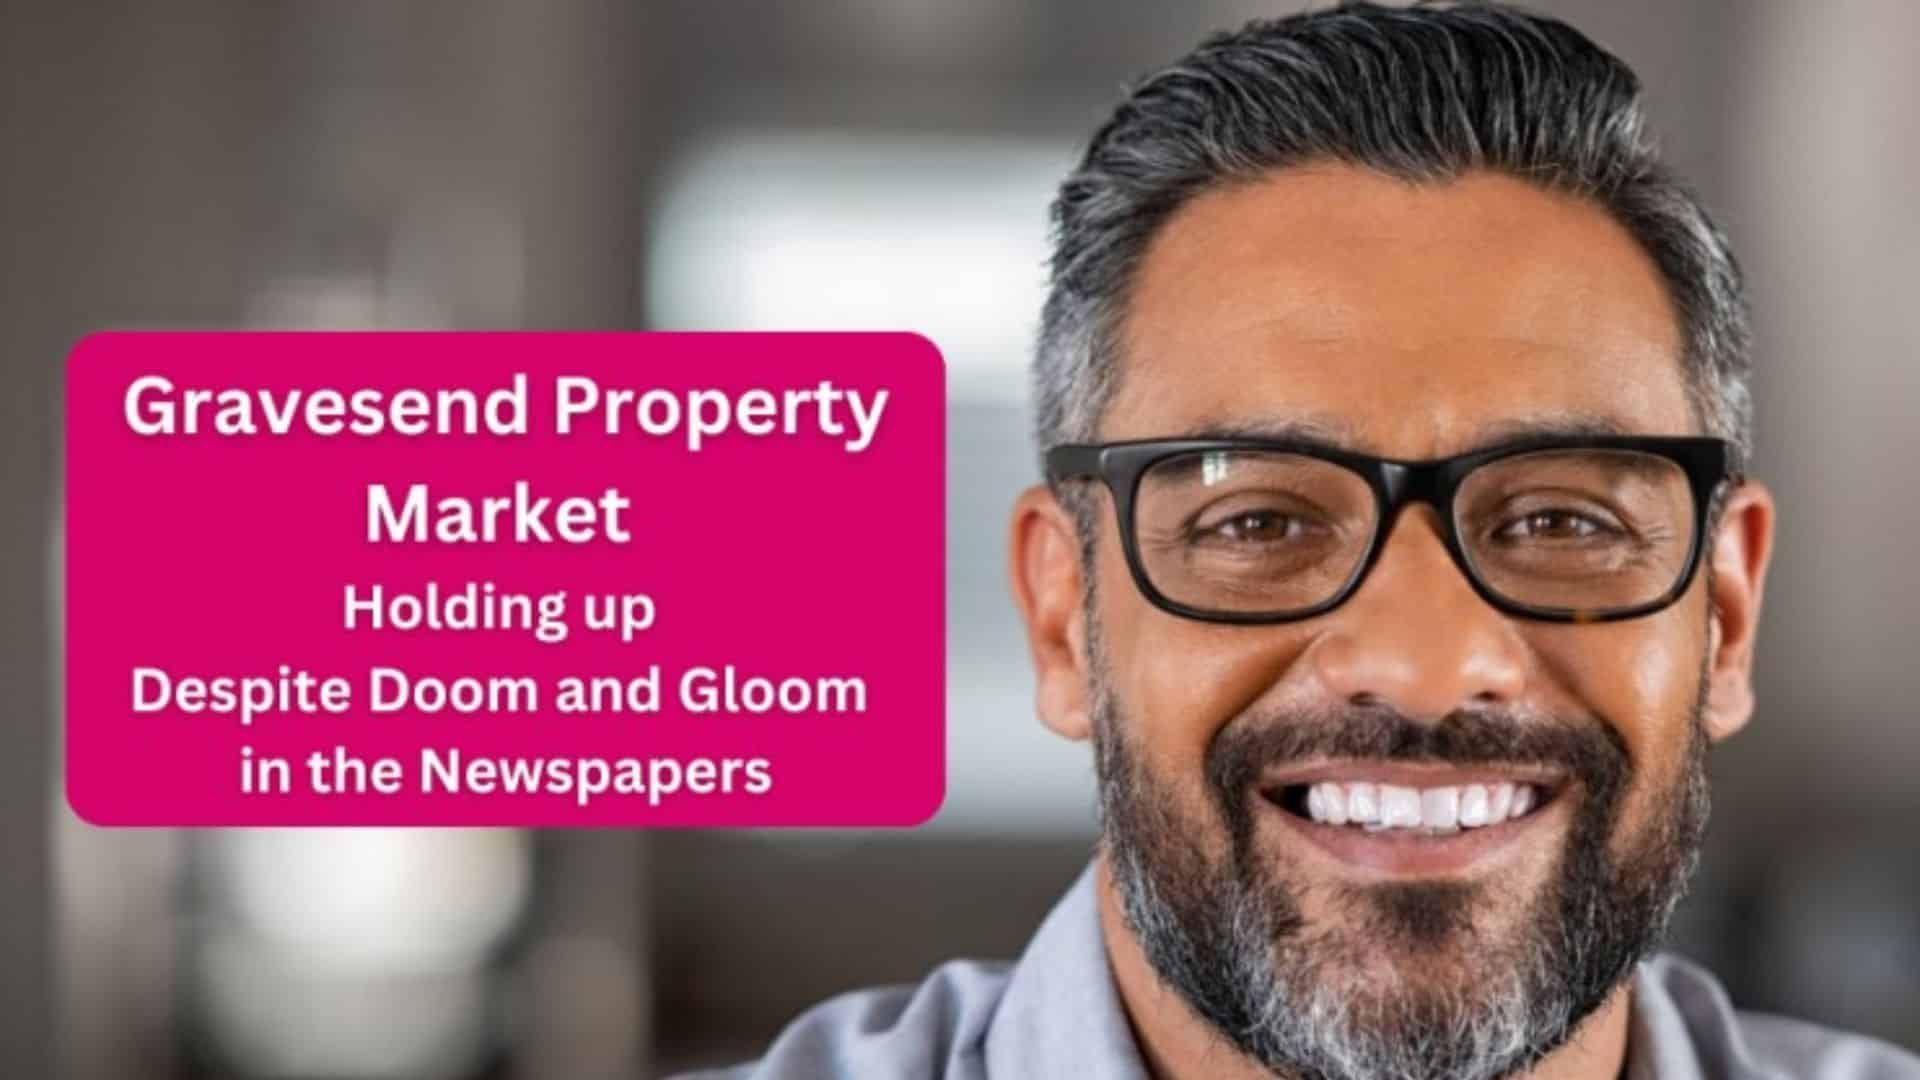 Gravesend Property Market Holding Up Despite Doom And Gloom In The Newspapers